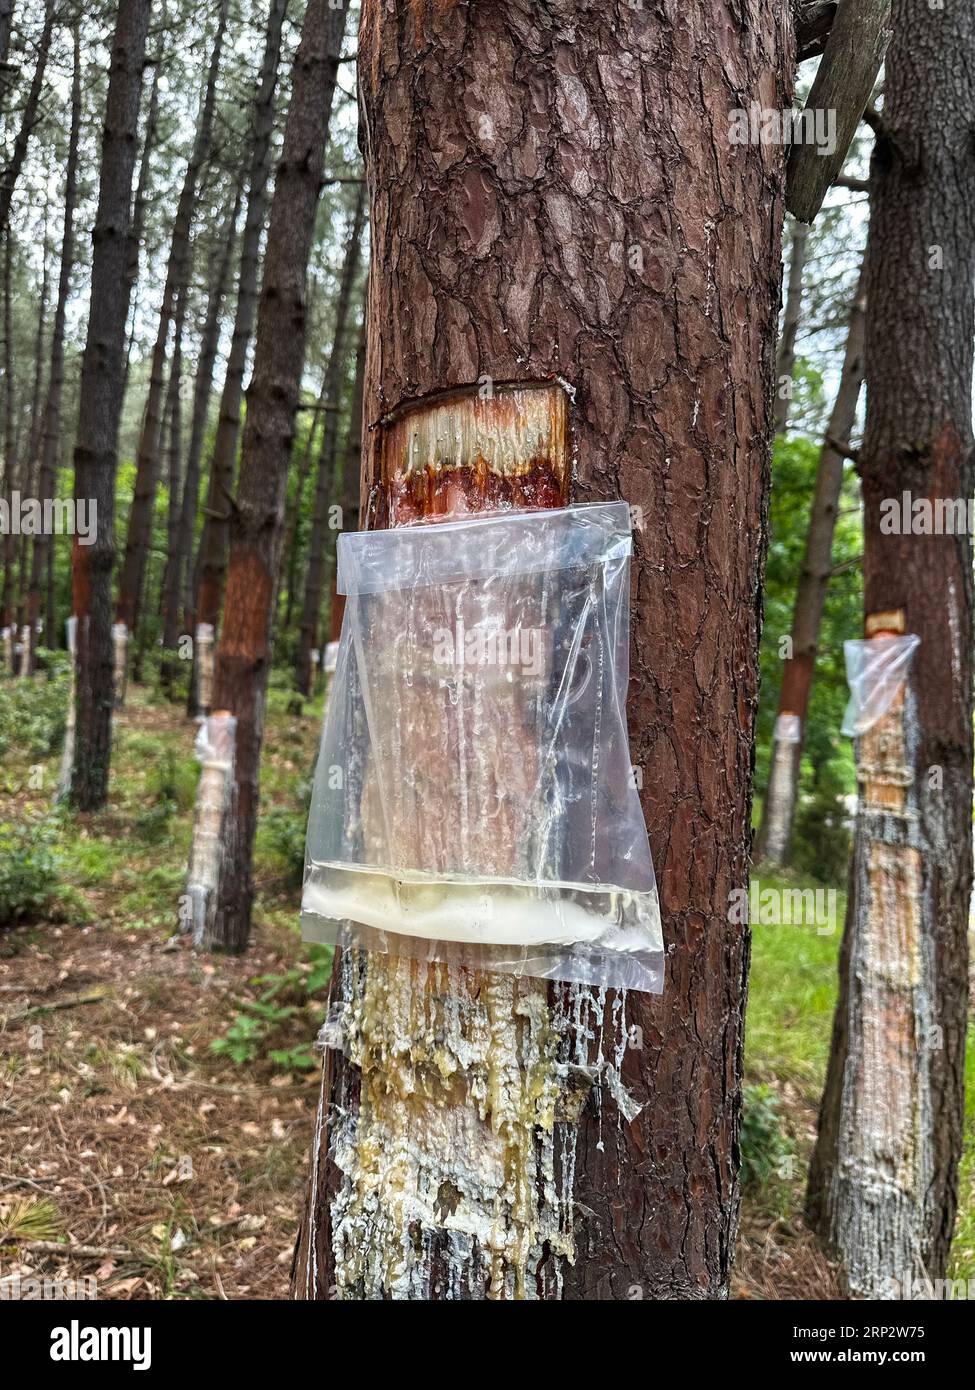 Resin production from pine trees. Resin bag. Stock Photo